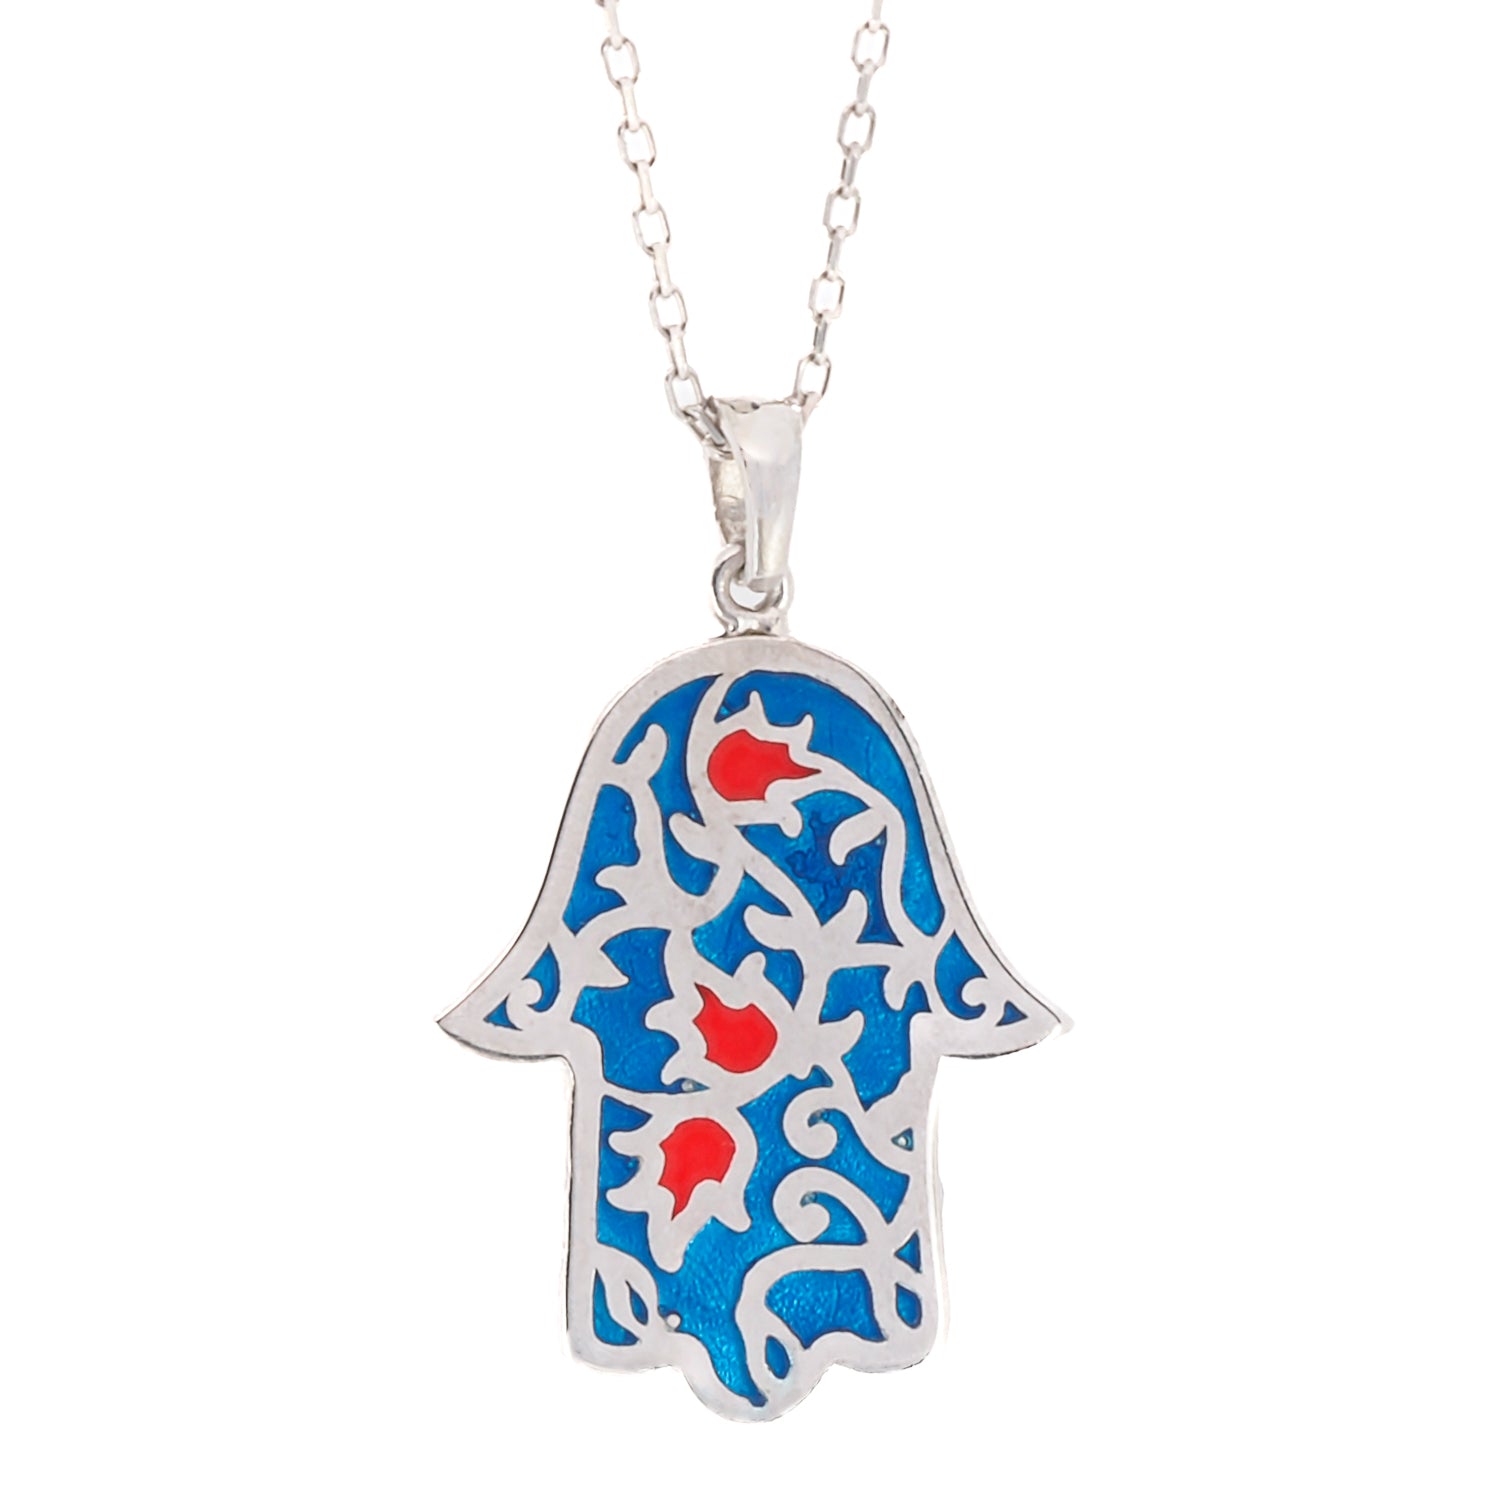 A close-up of the intricate blue and red enamel on the Hamsa pendant of the Good Vibes Enamel Hamsa Necklace Silver.